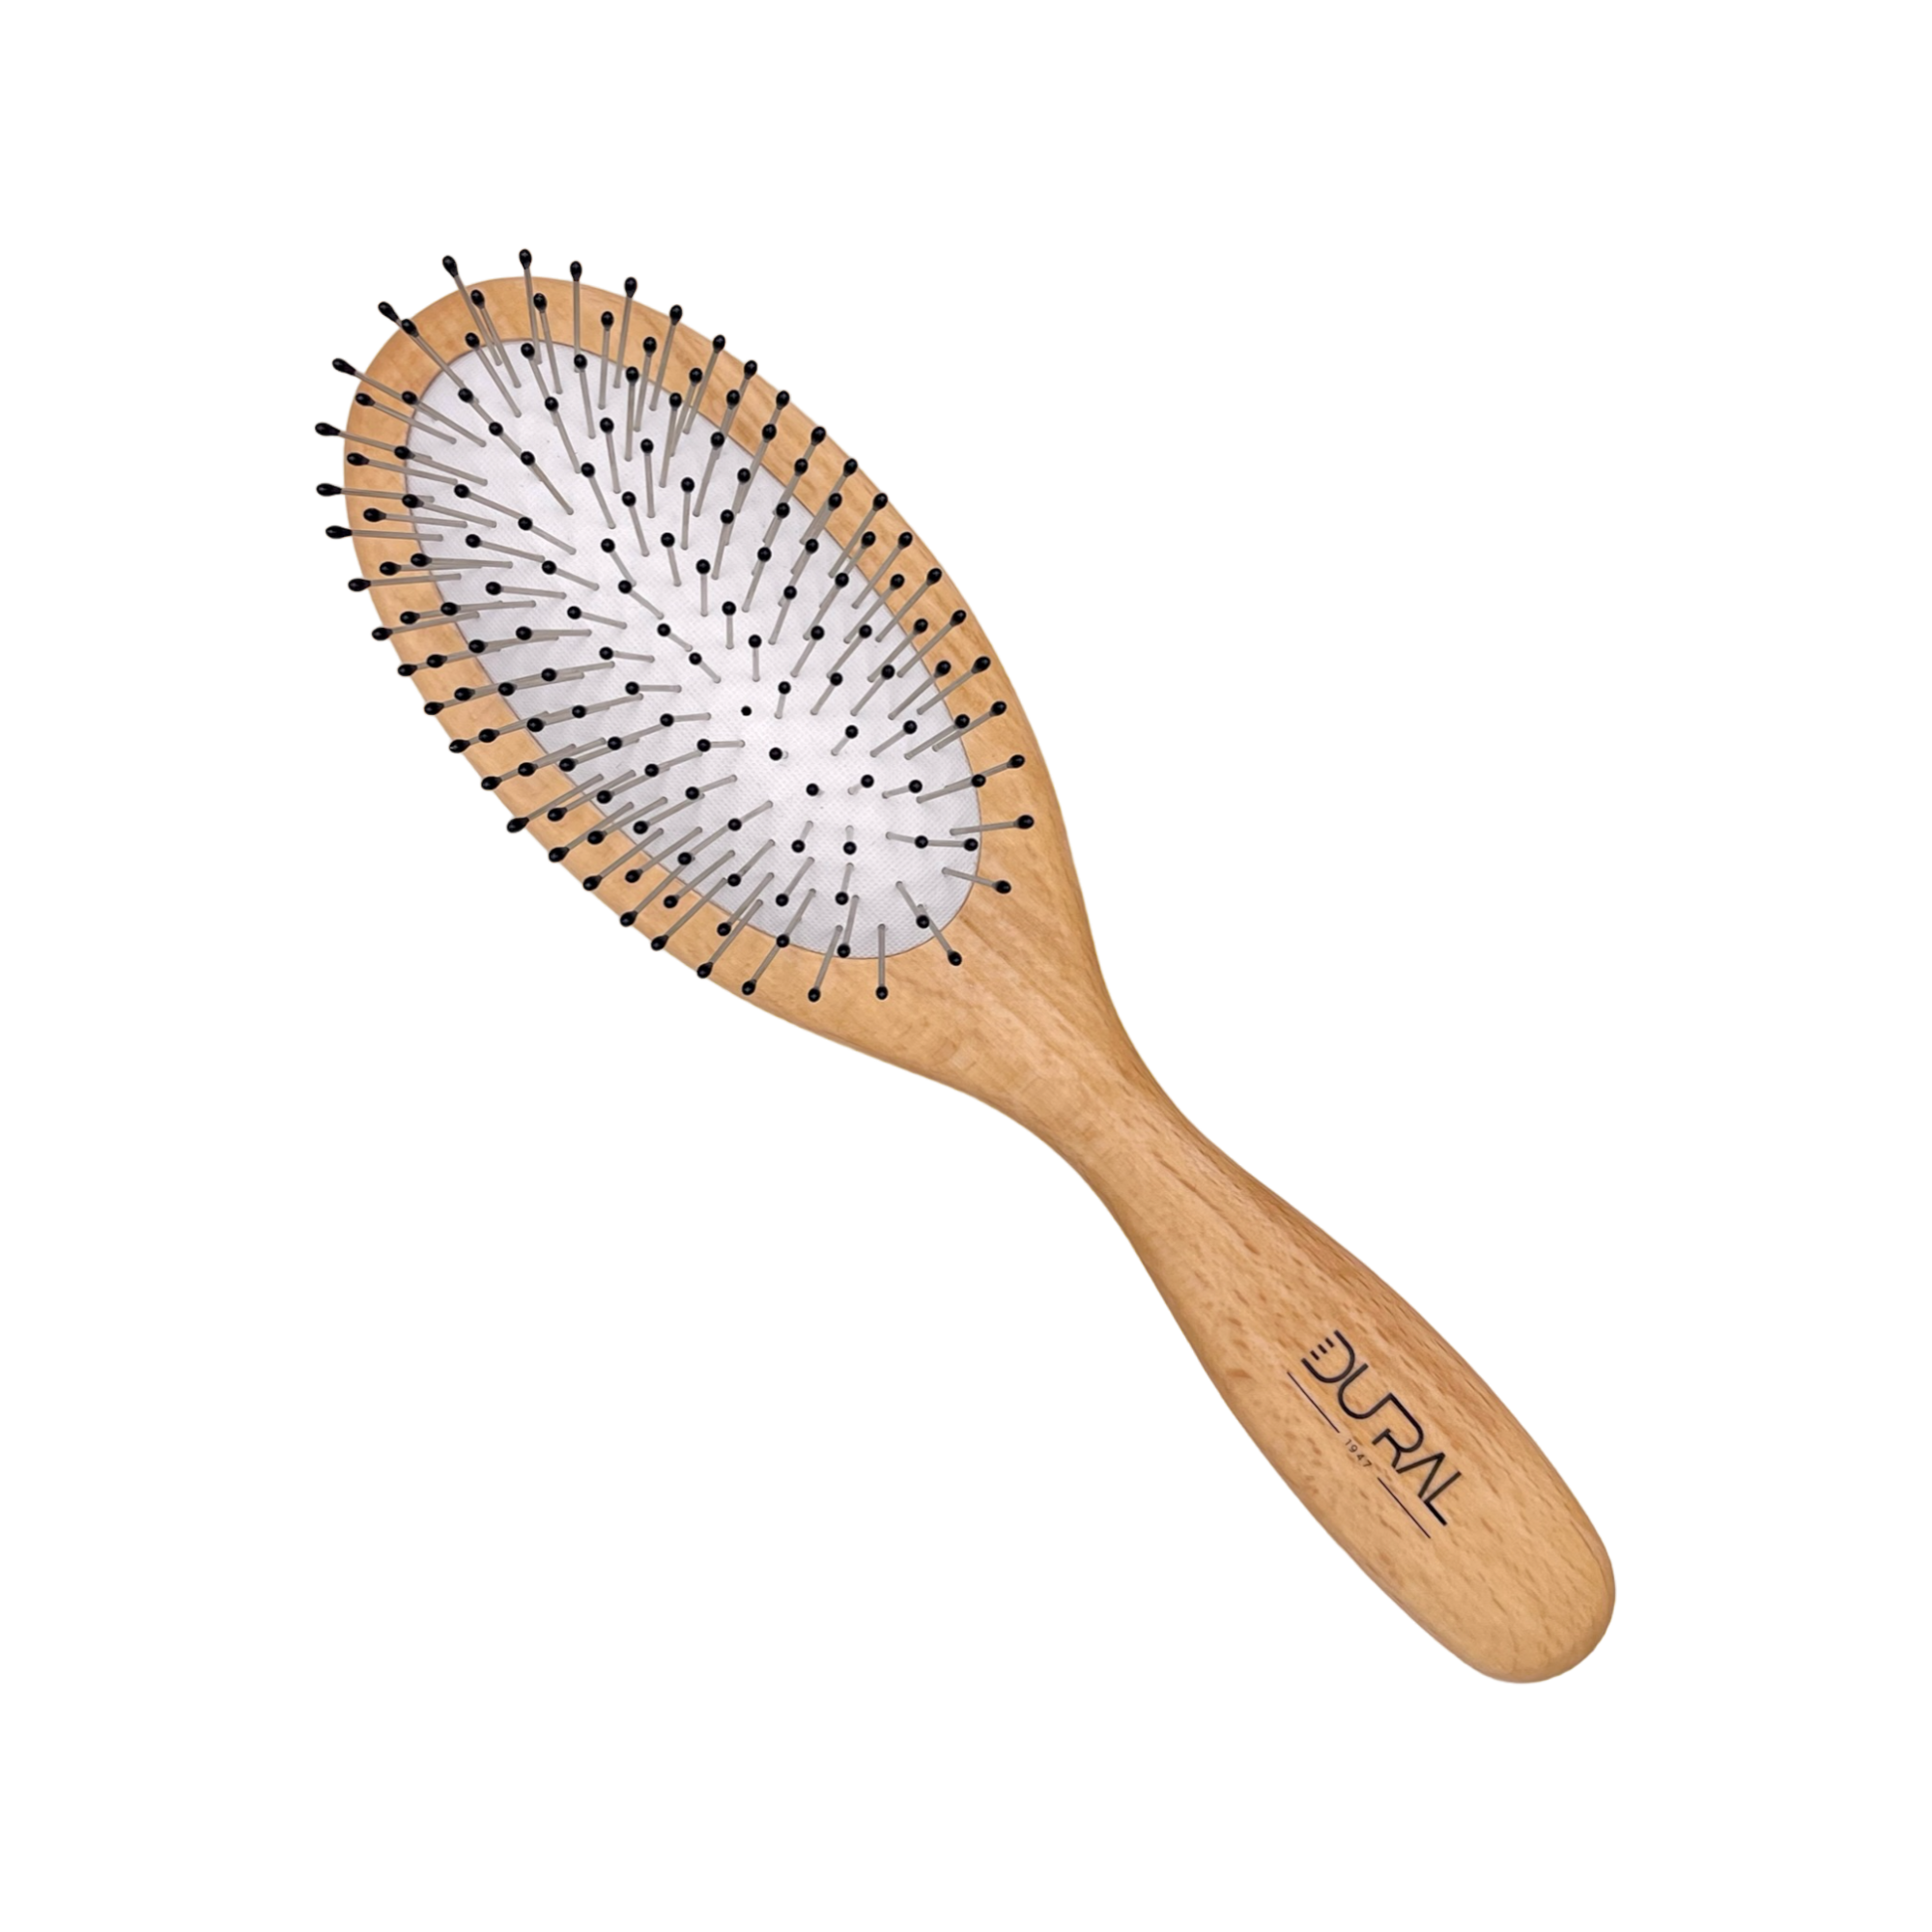 Dural Rubber Cushion Beech Wood Hair Brush, Steel Pins with Ball Tips